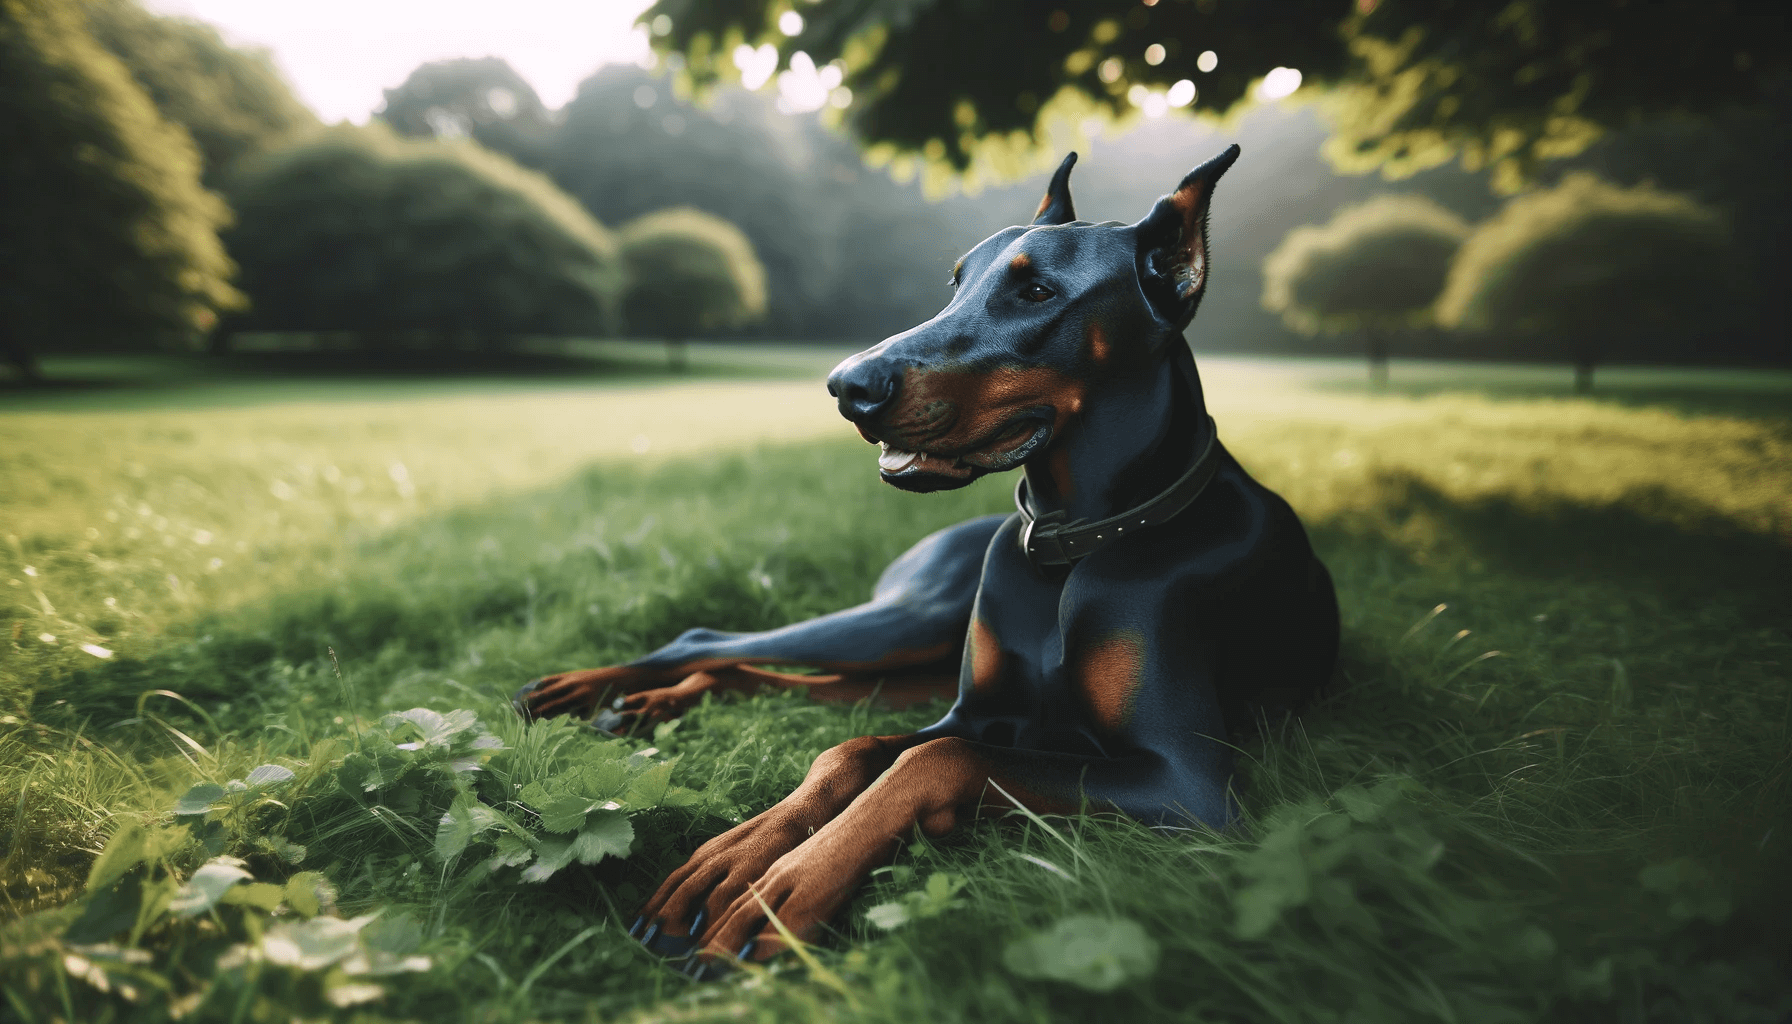 A Blue Doberman lying on grass, possibly after playtime or training.